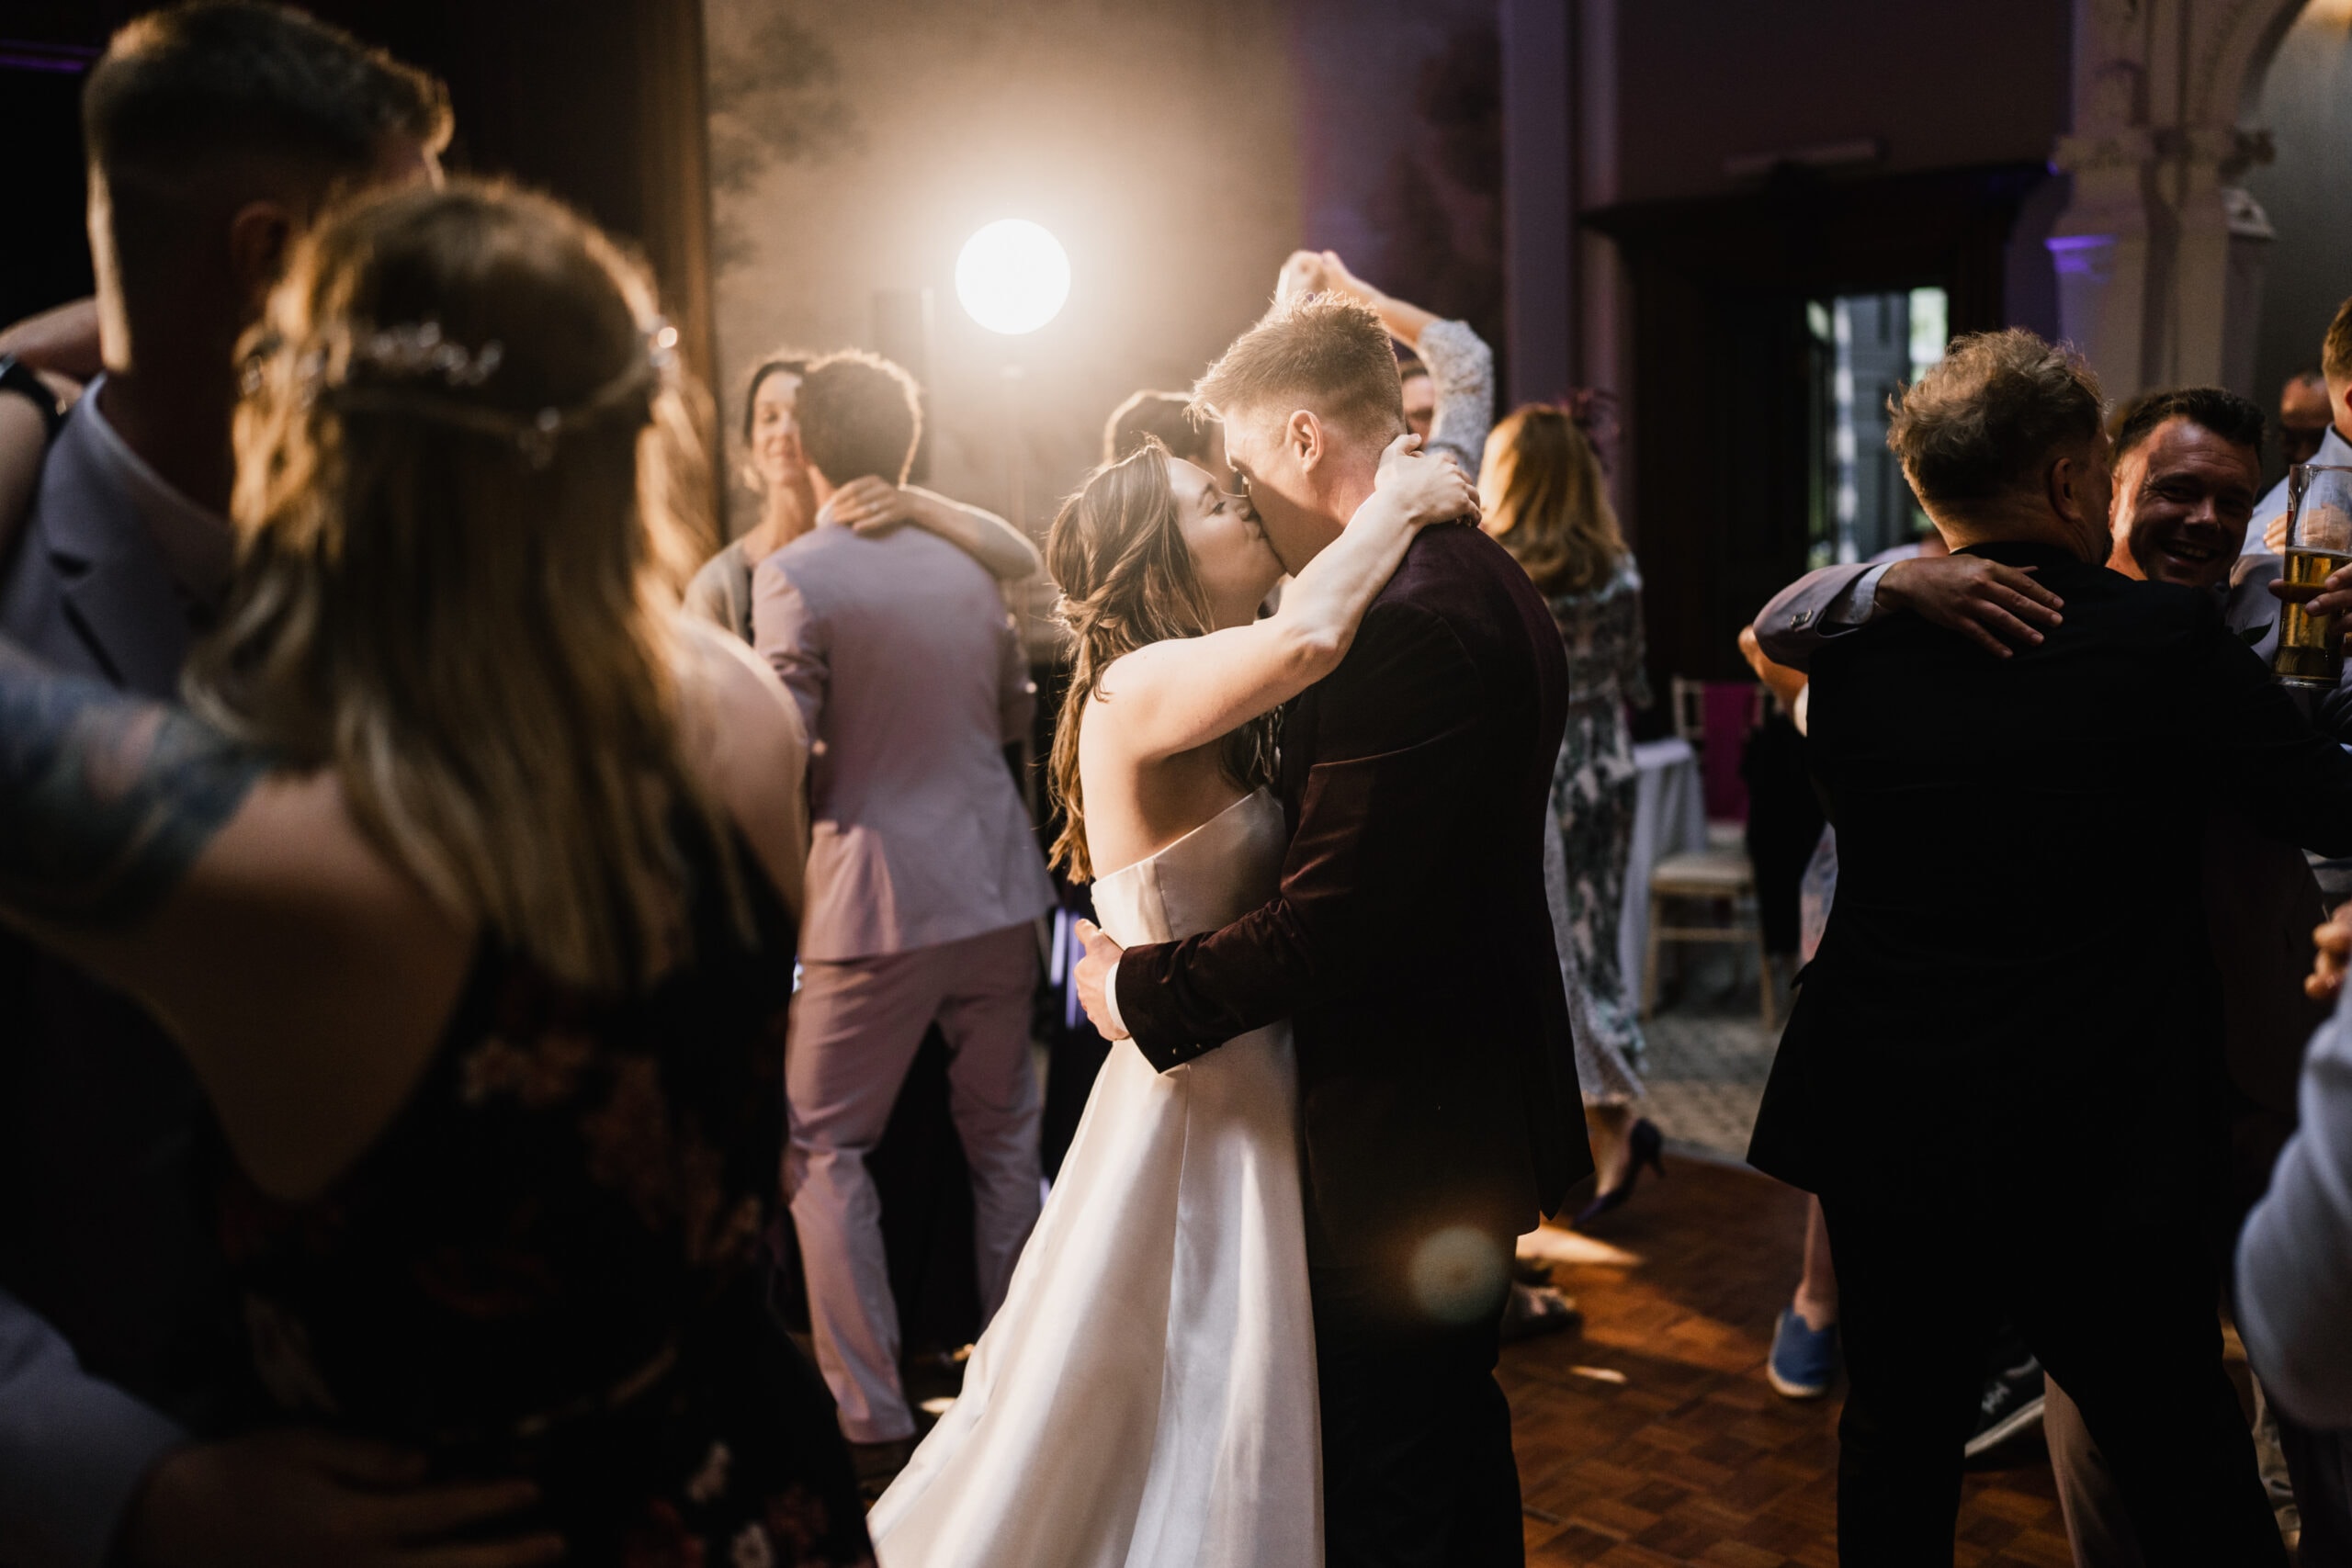 A bride and groom share a romantic kiss on the dance floor surrounded by guests dancing and celebrating at a lively wedding reception.